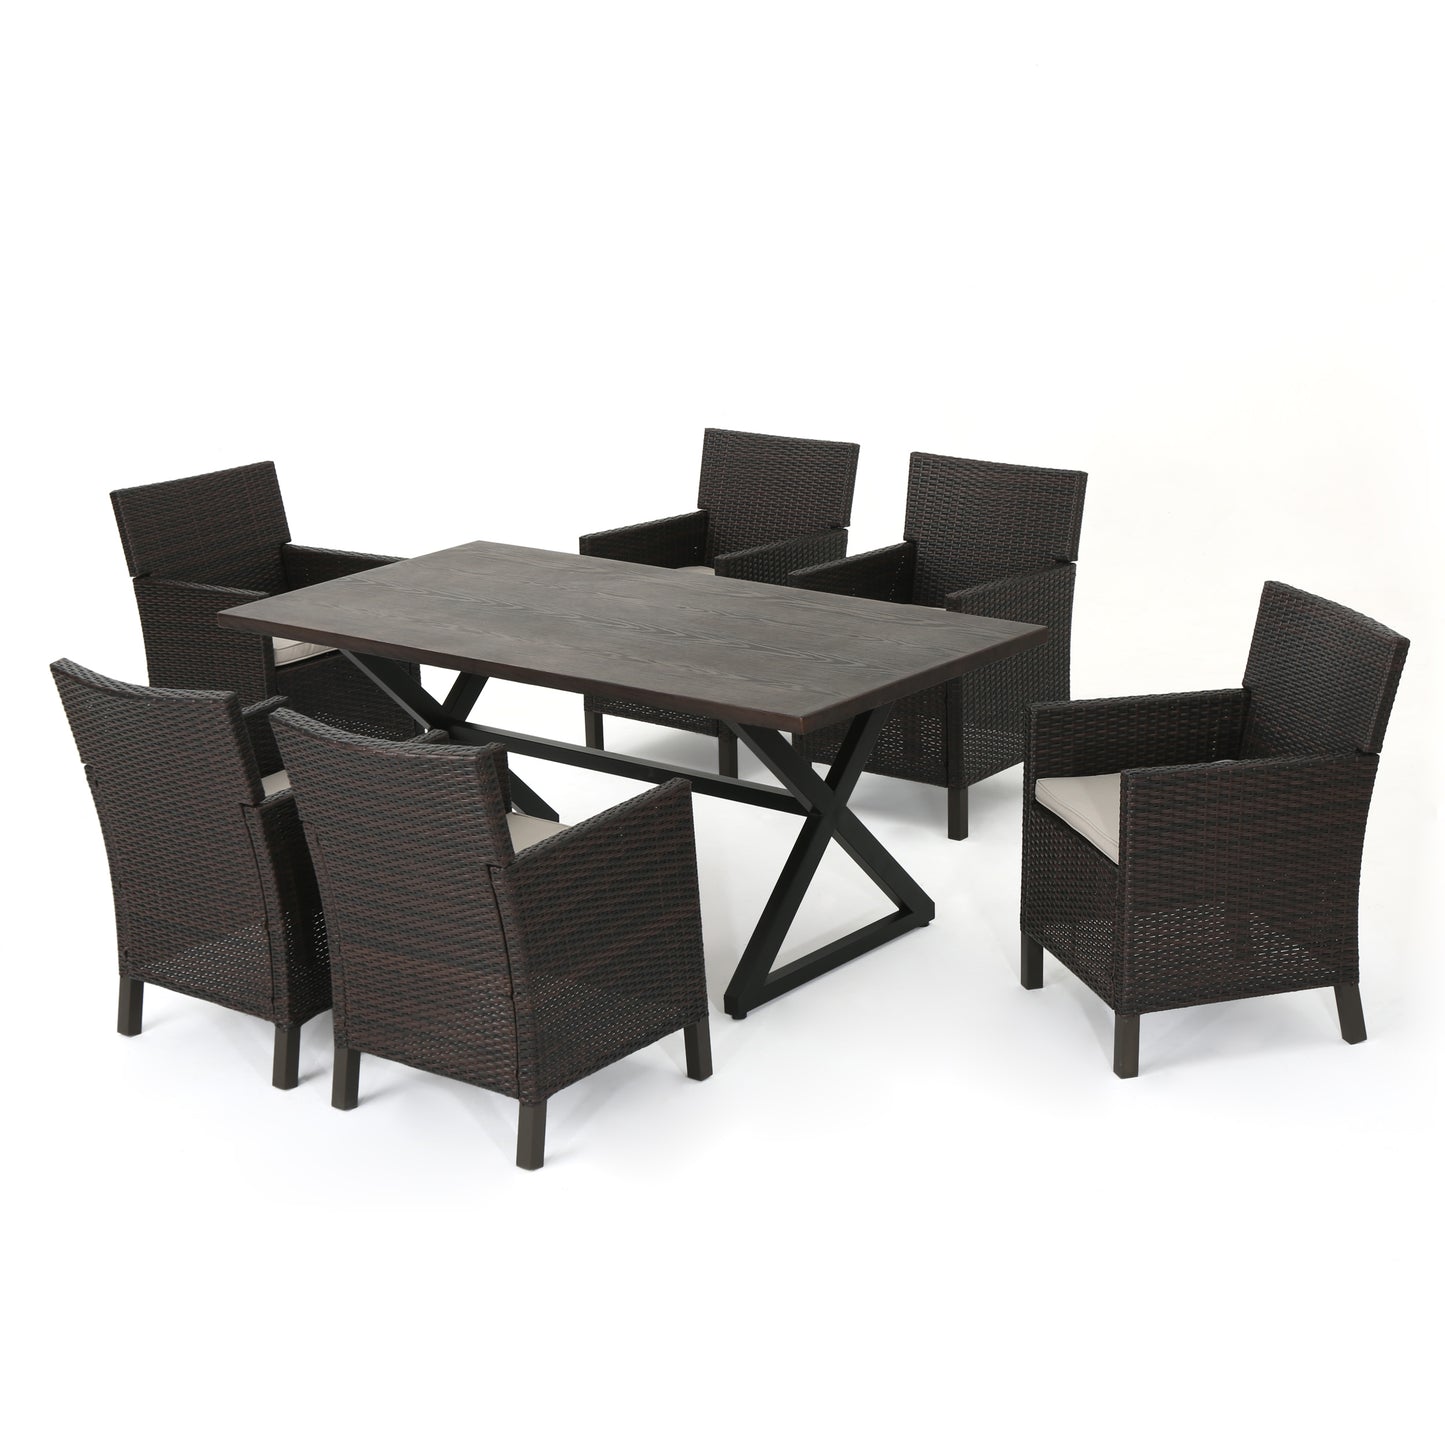 Blane Outdoor 7 Piece Grey Dining Set with Aluminum Dining Table